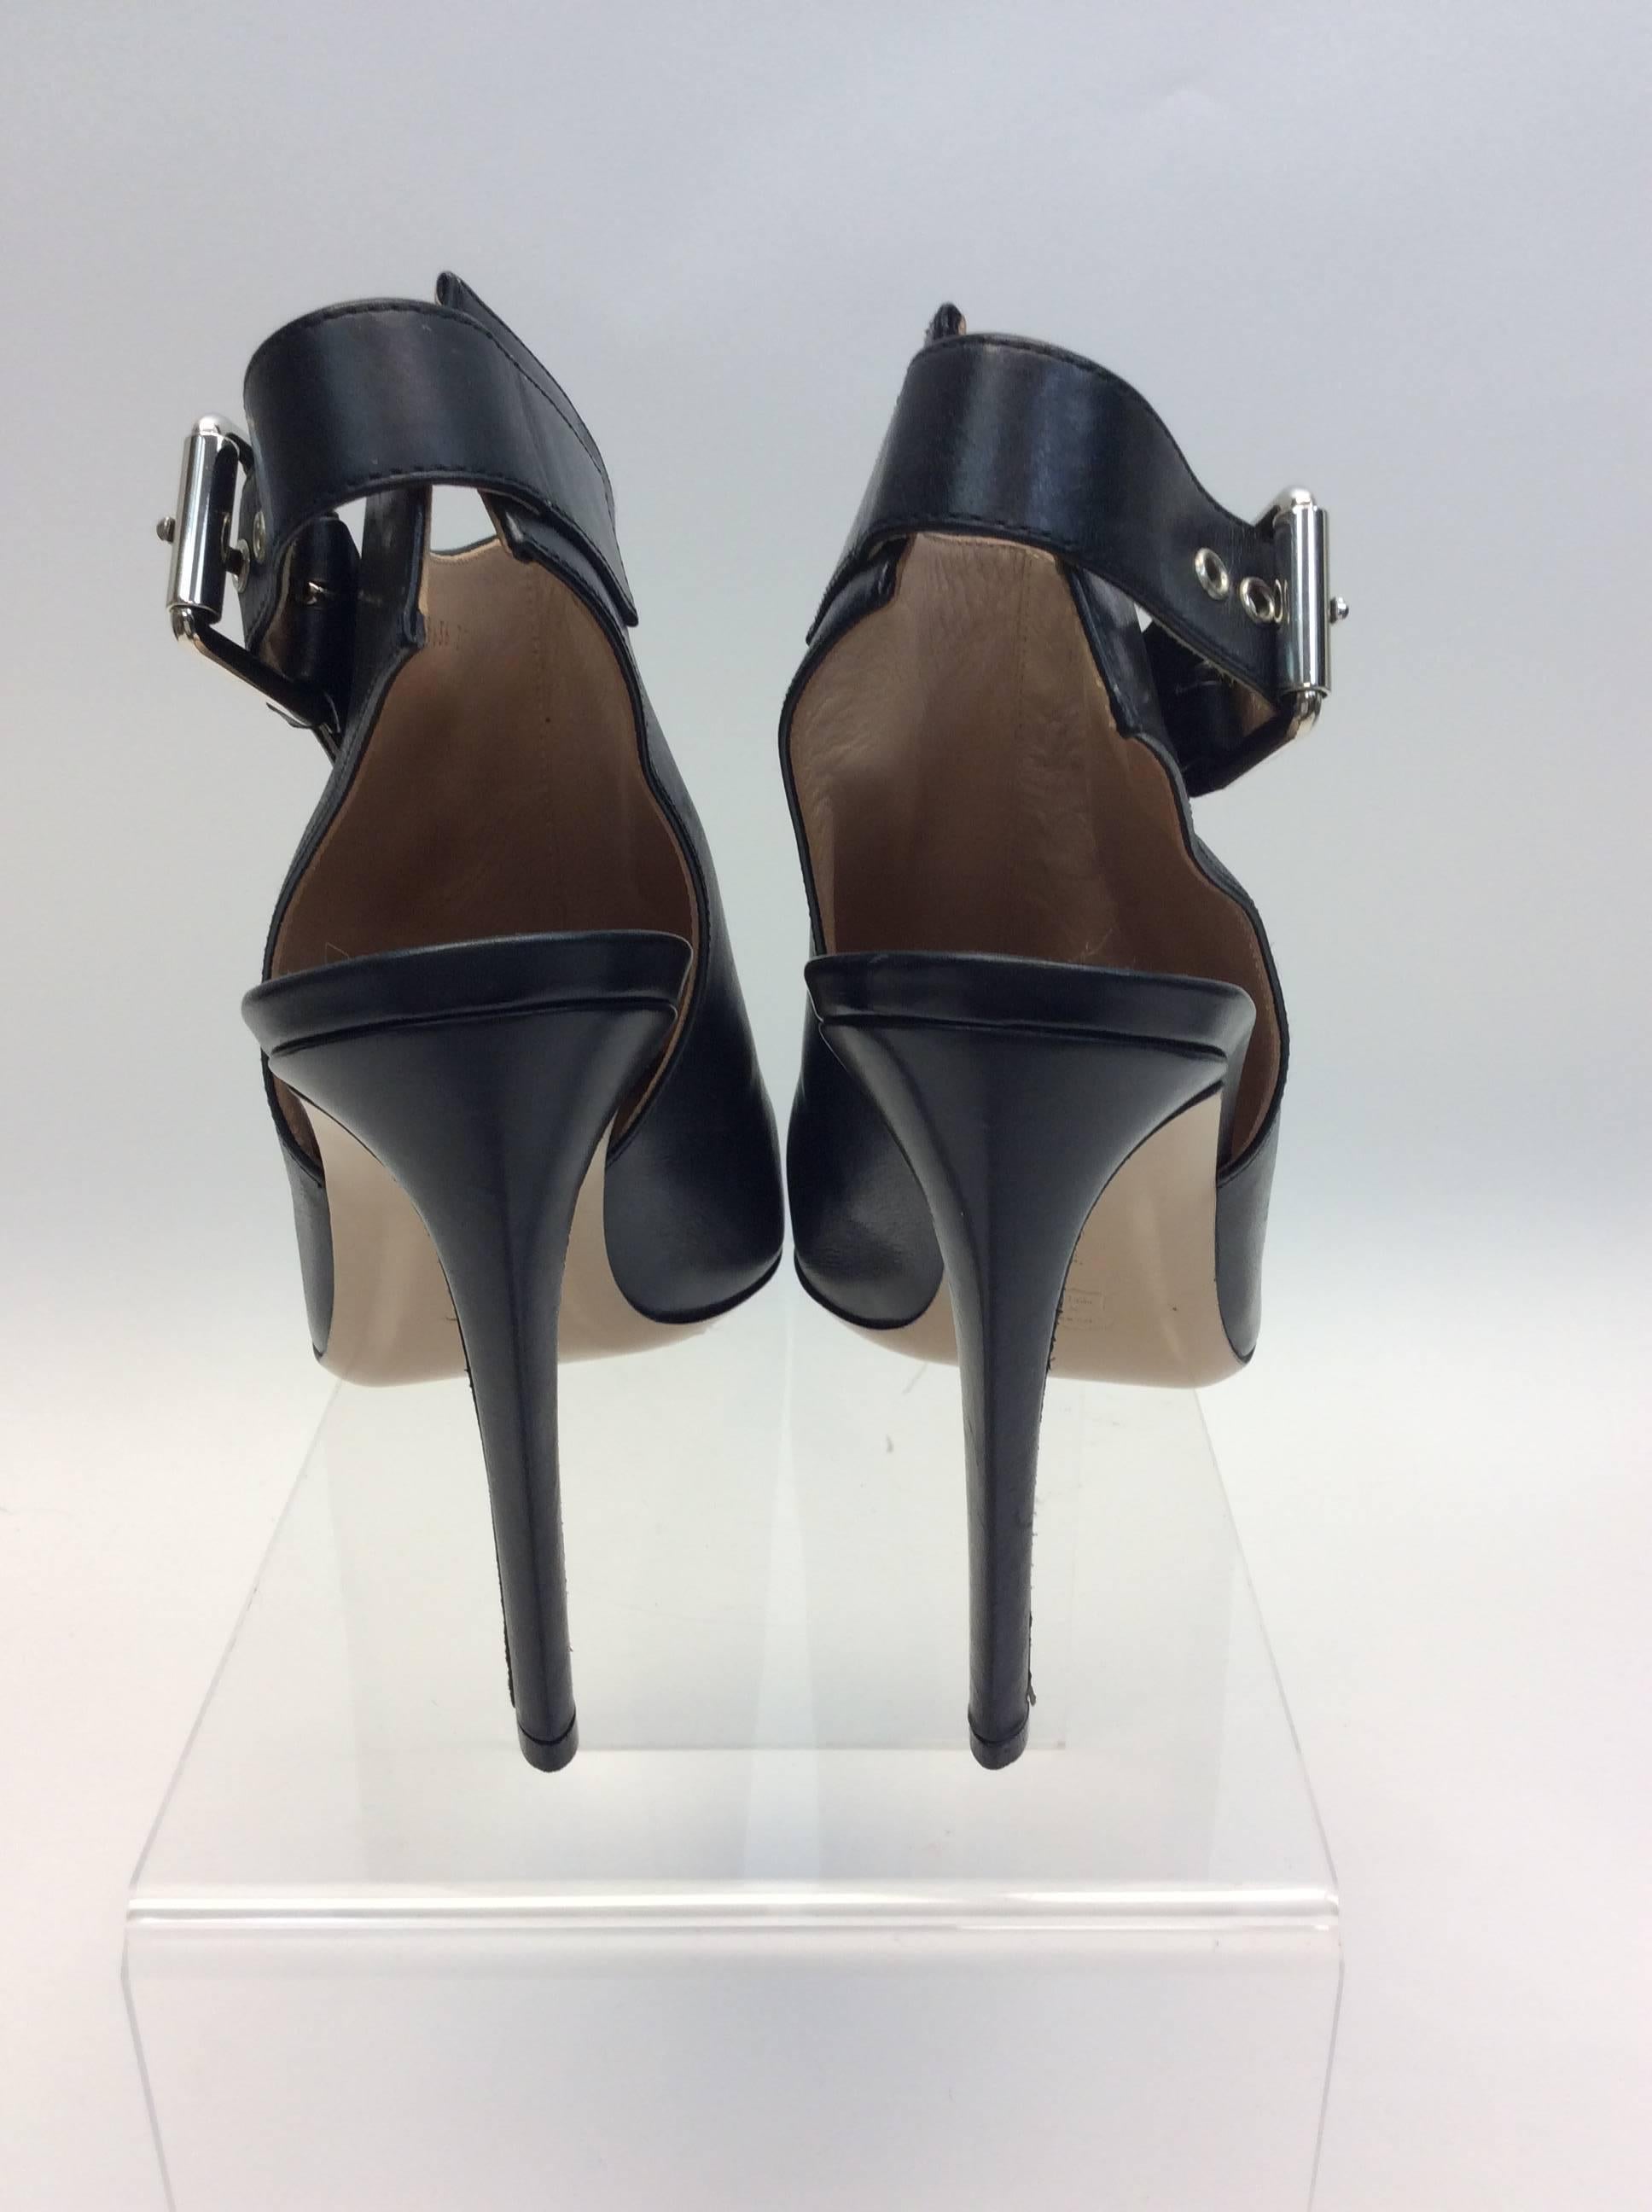 Gianvito Rossi Black Slingback Booties In Excellent Condition For Sale In Narberth, PA